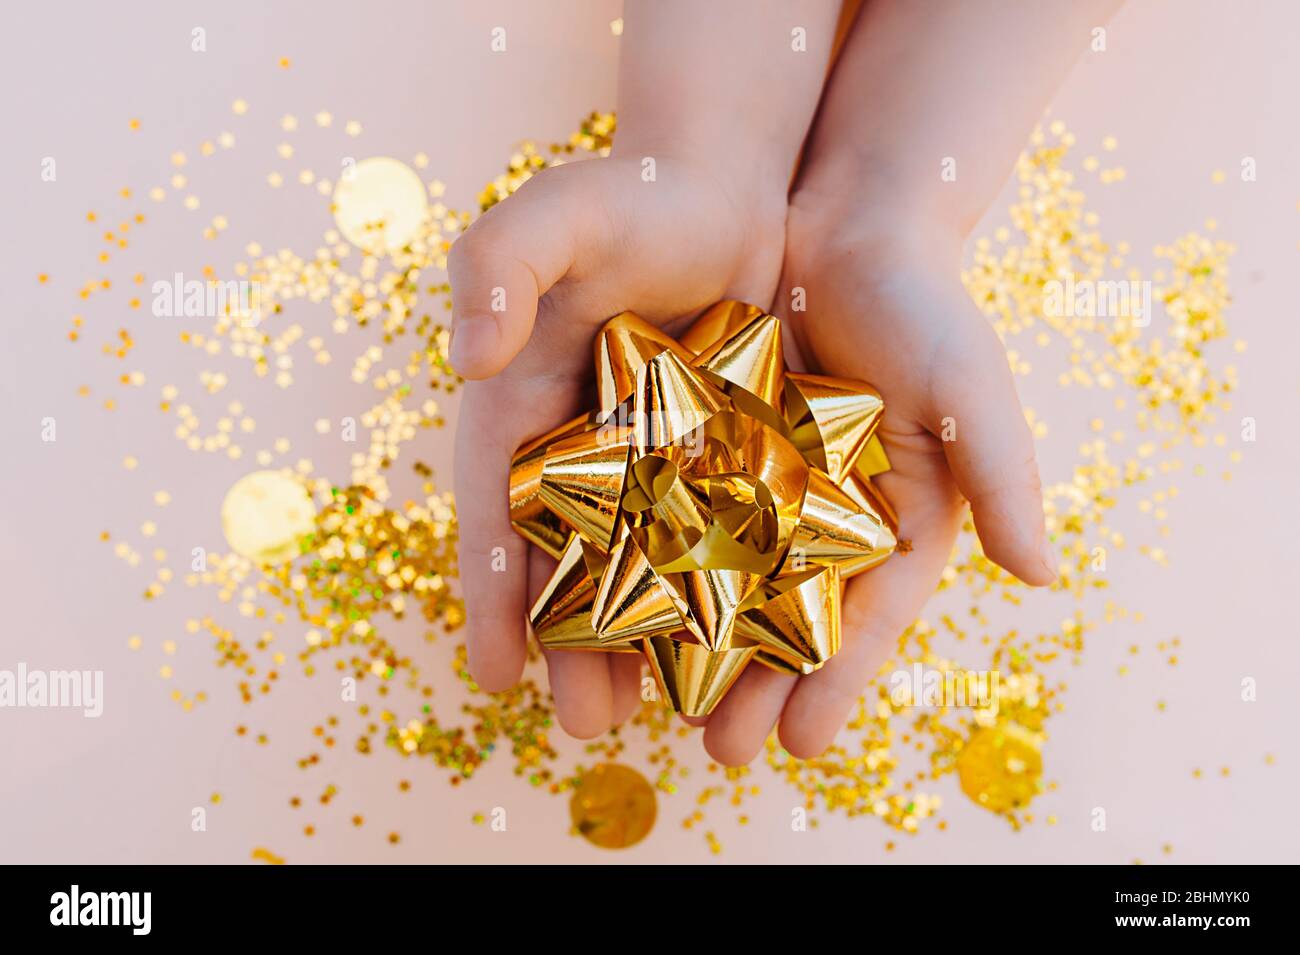 Children's hands light skin holding a large gift bow made of gold foil on a background of scattered gold sequins Stock Photo